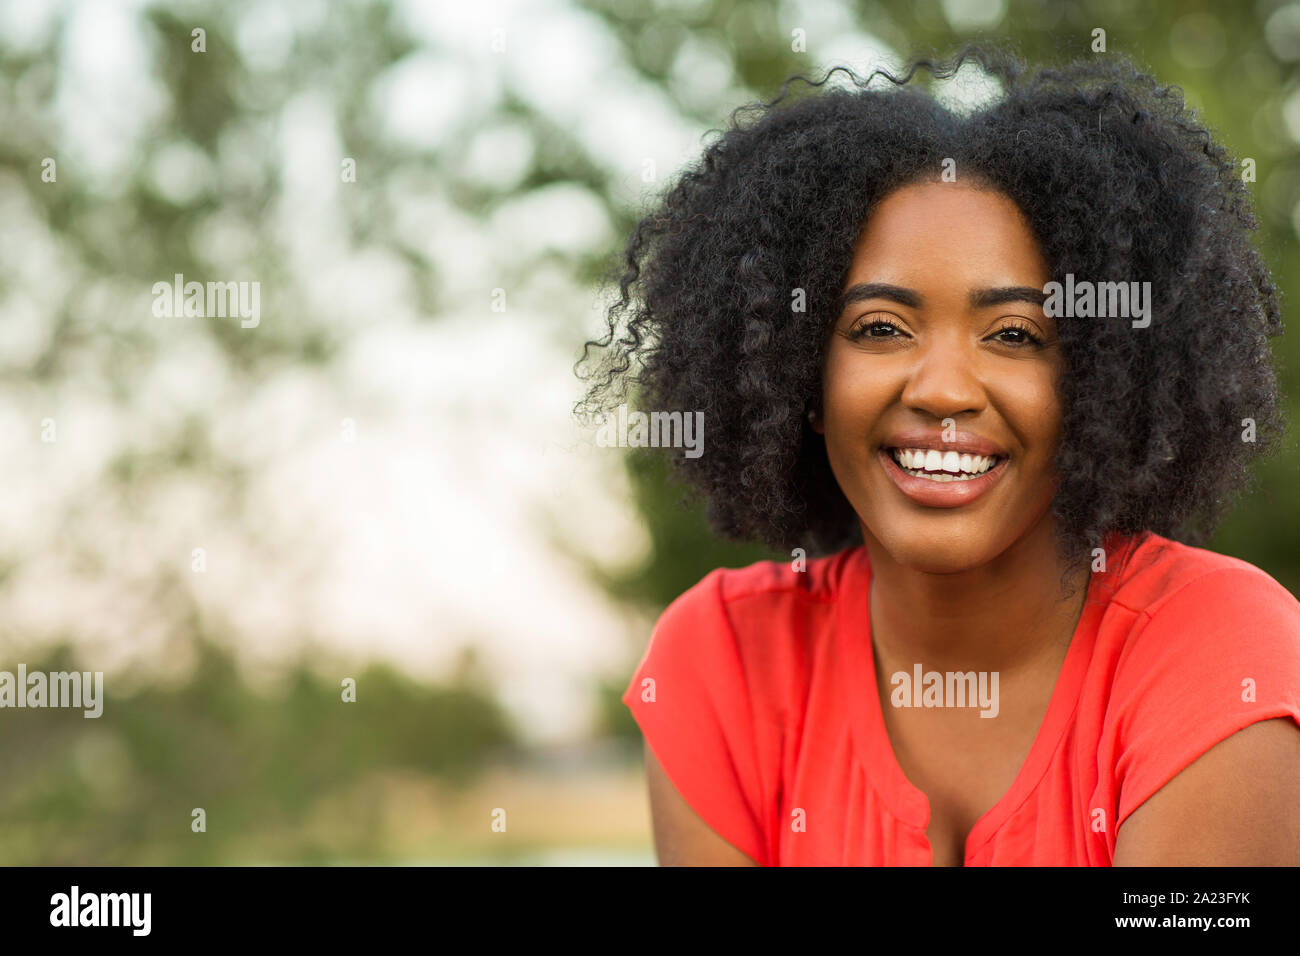 Happy confident African American woman smiling outside. Stock Photo